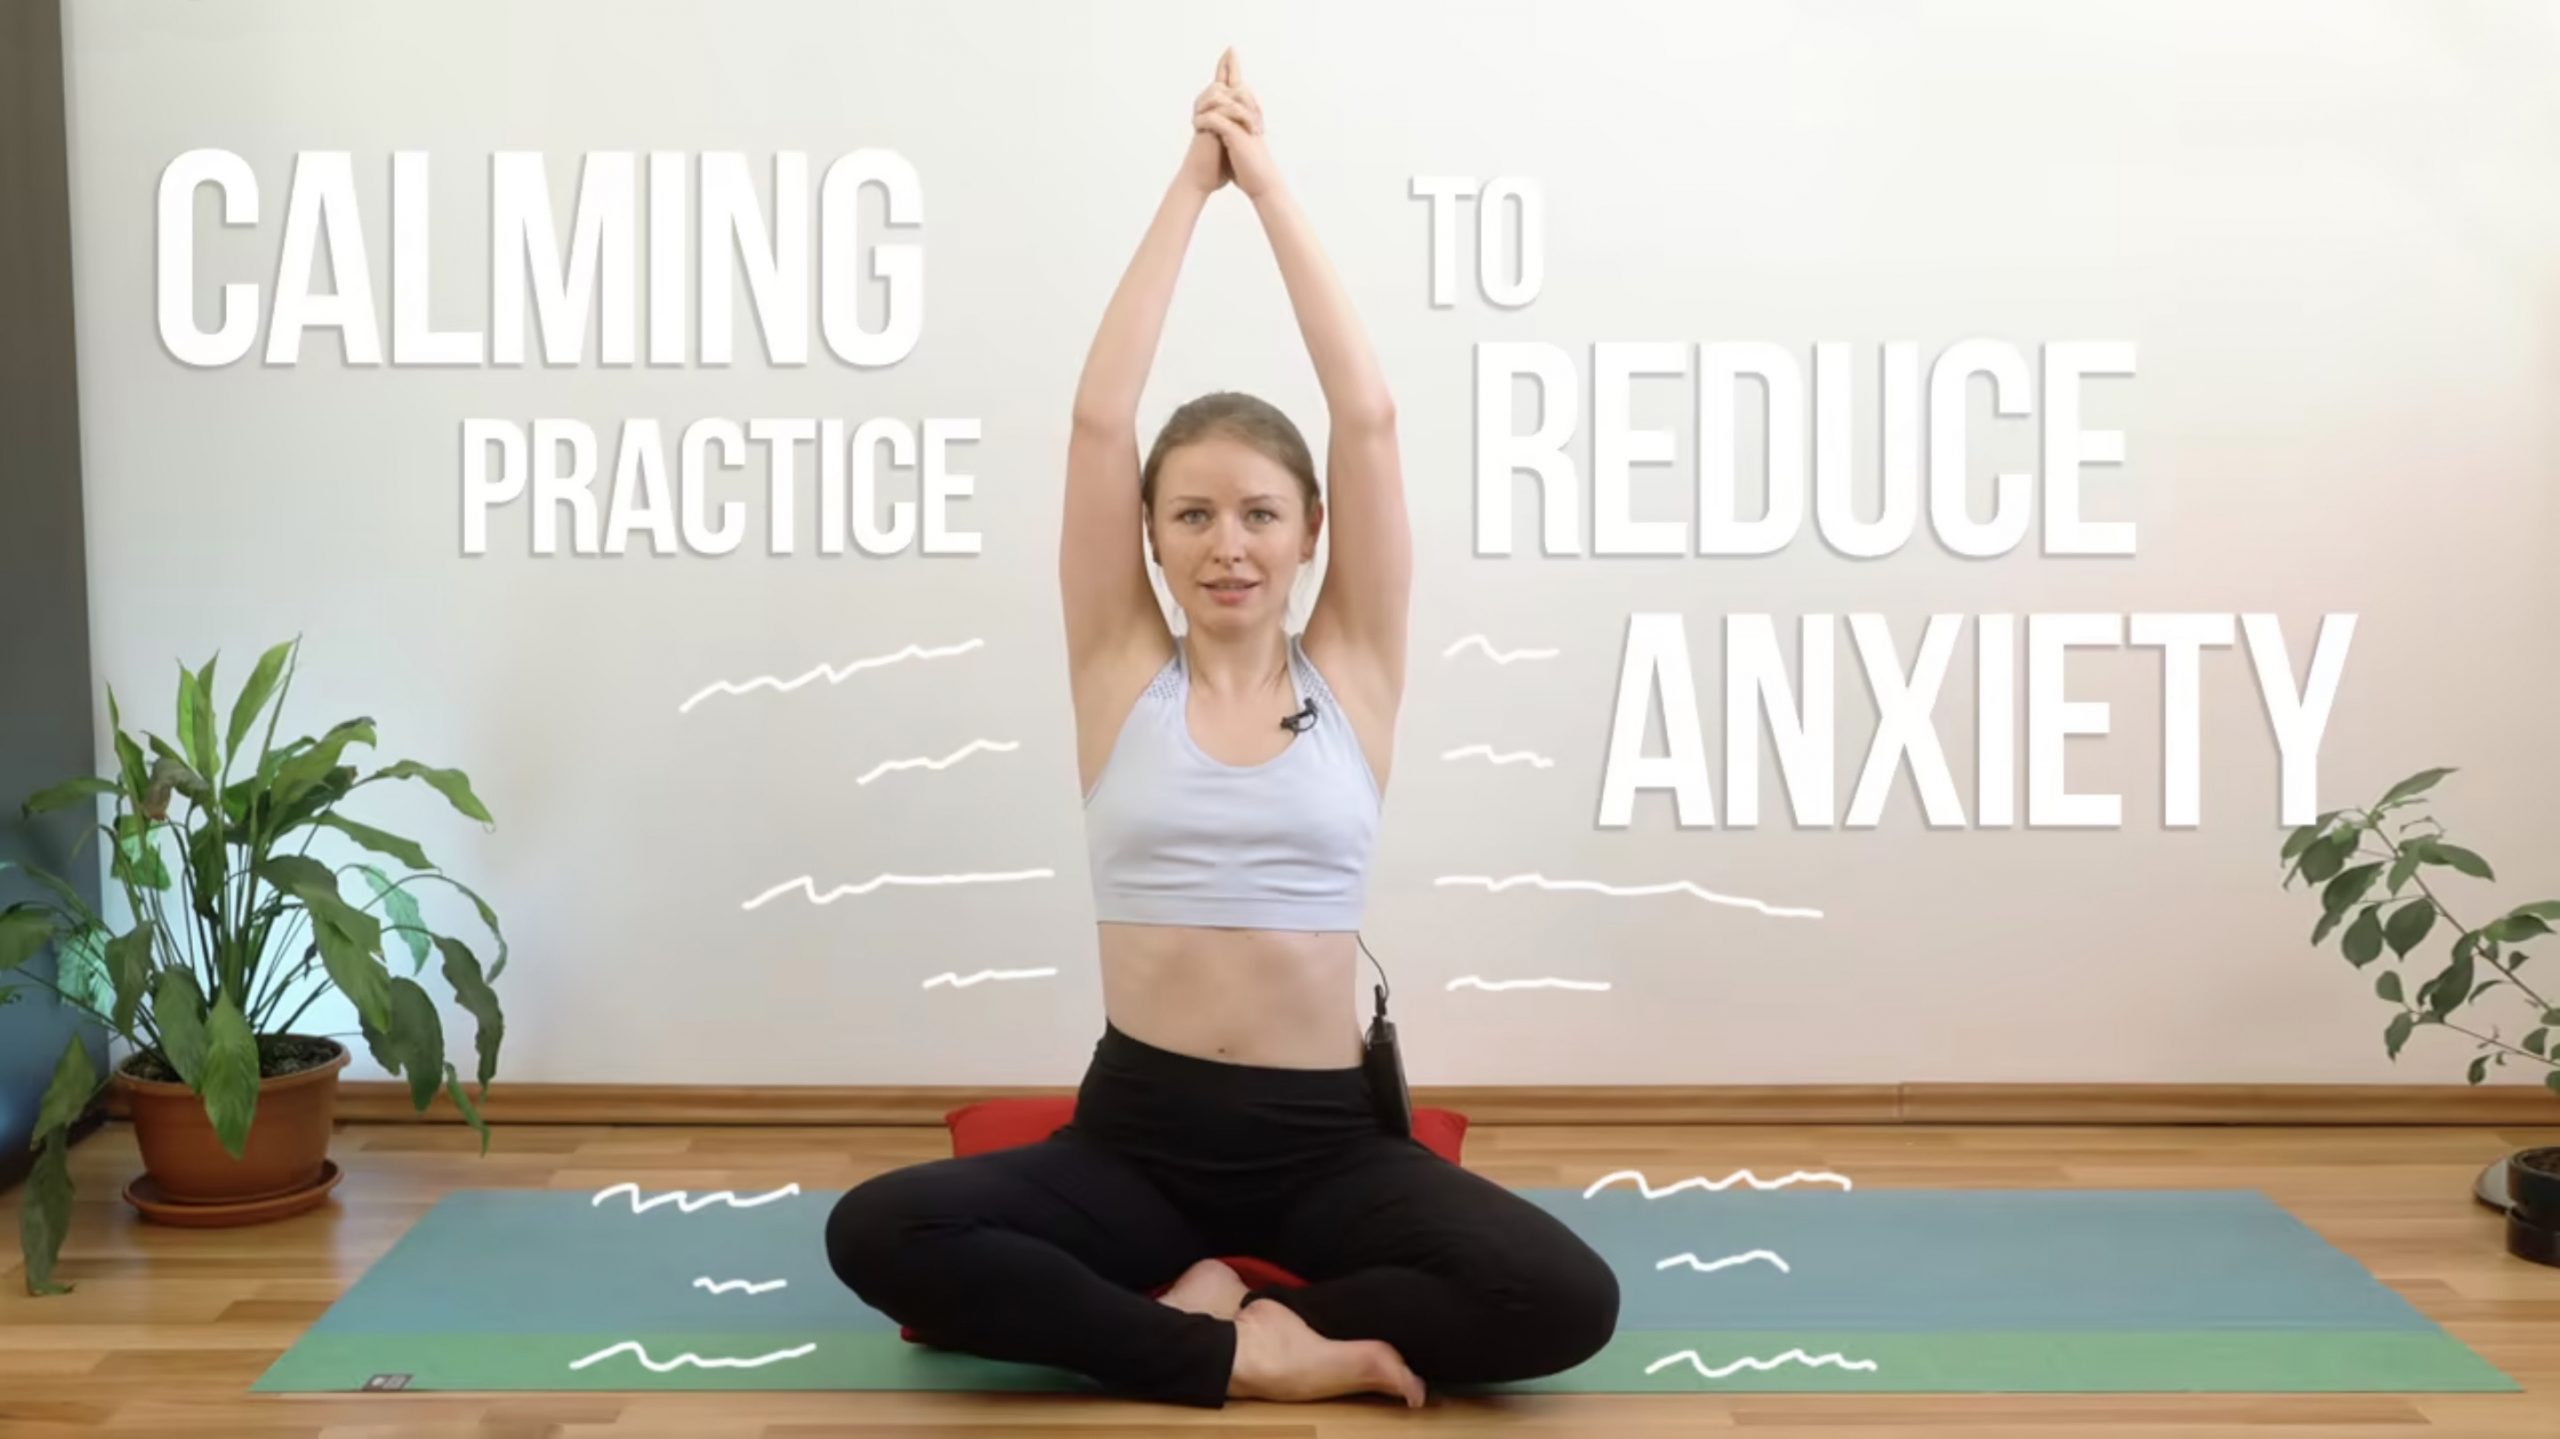 You are currently viewing Calming Practice To Reduce Anxiety [EN]